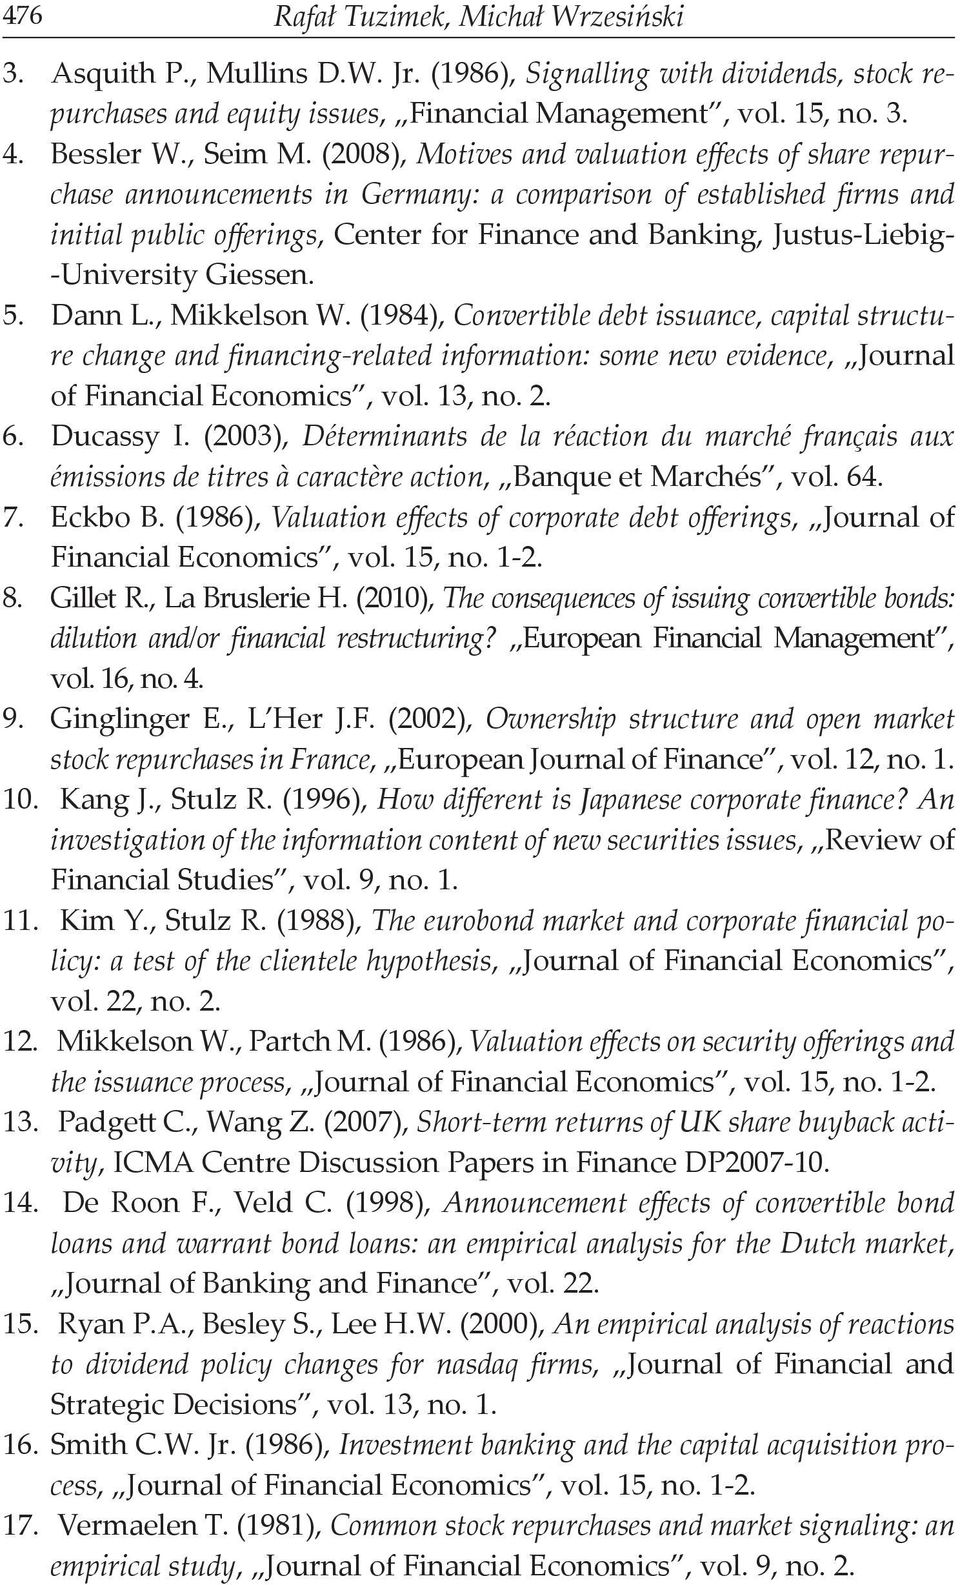 (2008), Motives and valuation effects of share repurchase announcements in Germany: a comparison of established firms and initial public offerings, Center for Finance and Banking, Justus-Liebig-